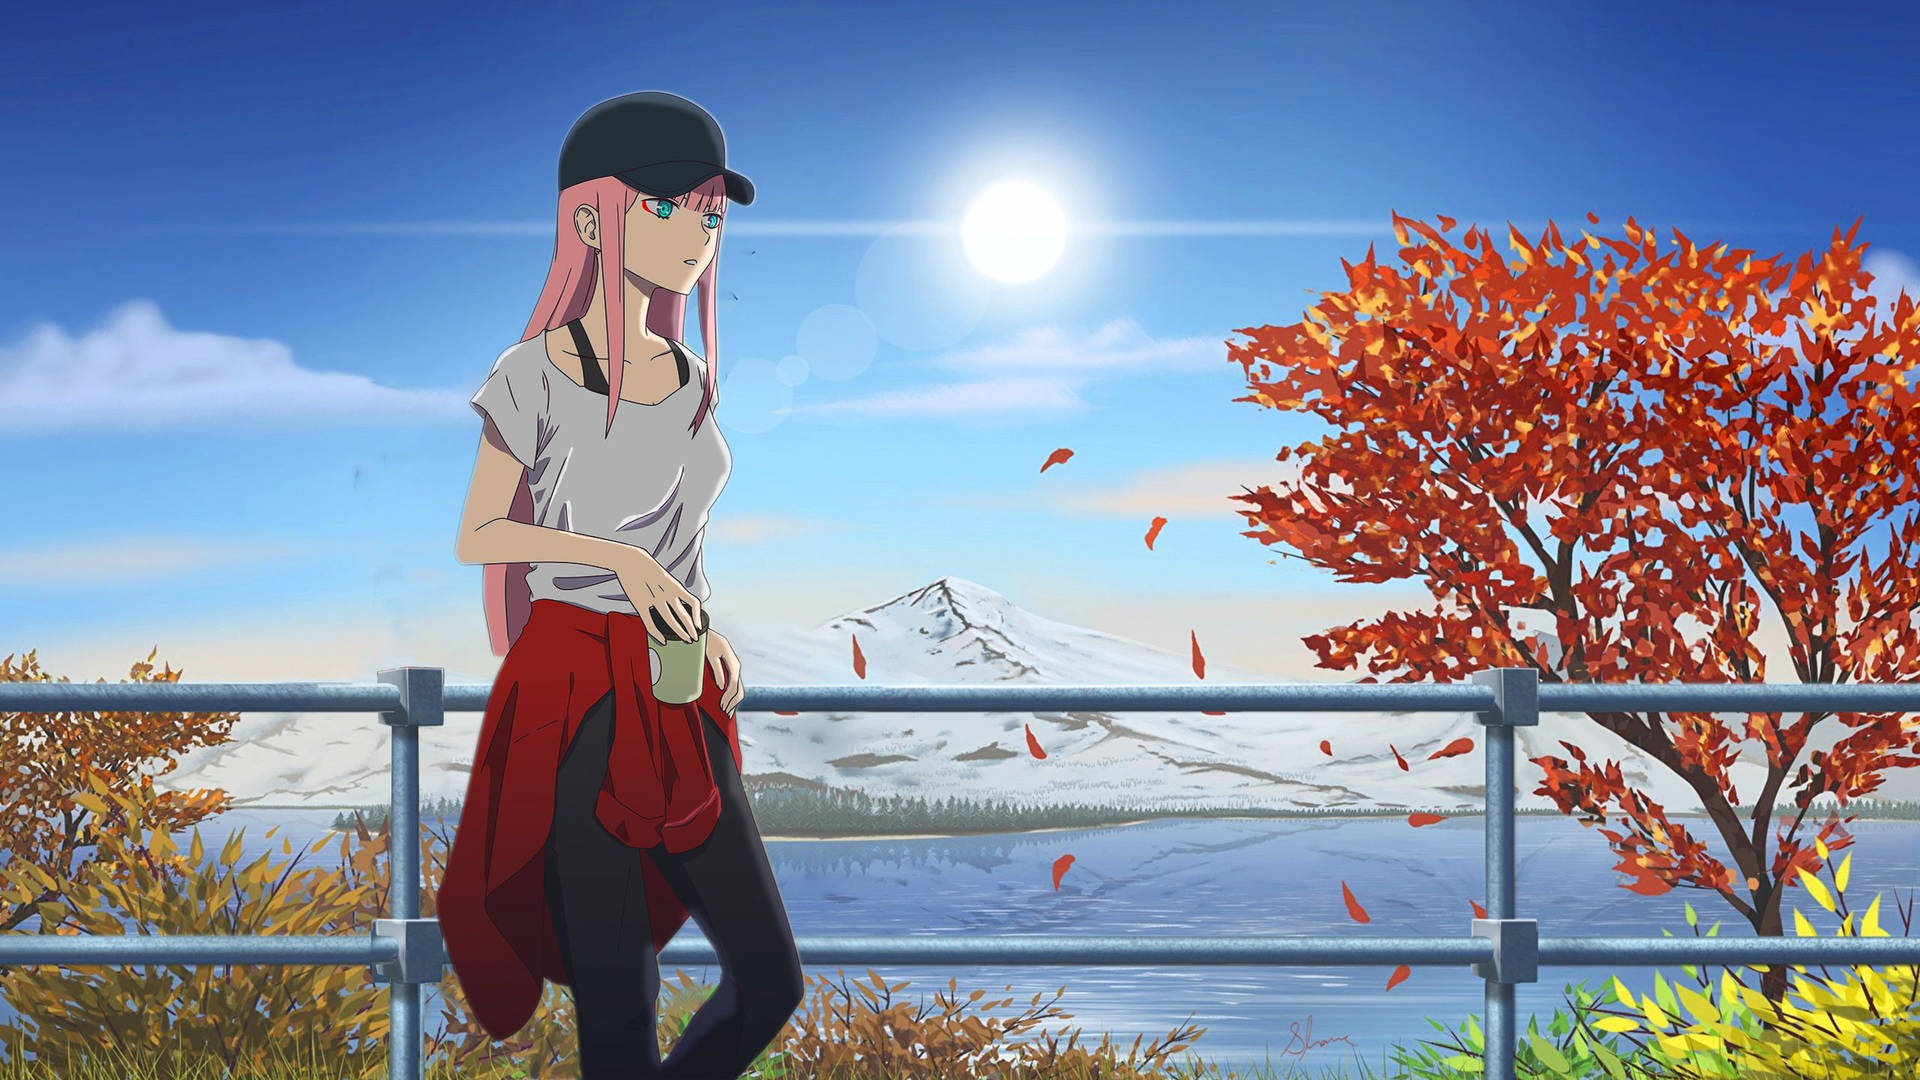 Zero Two 2560X1440 Wallpaper and Background Image